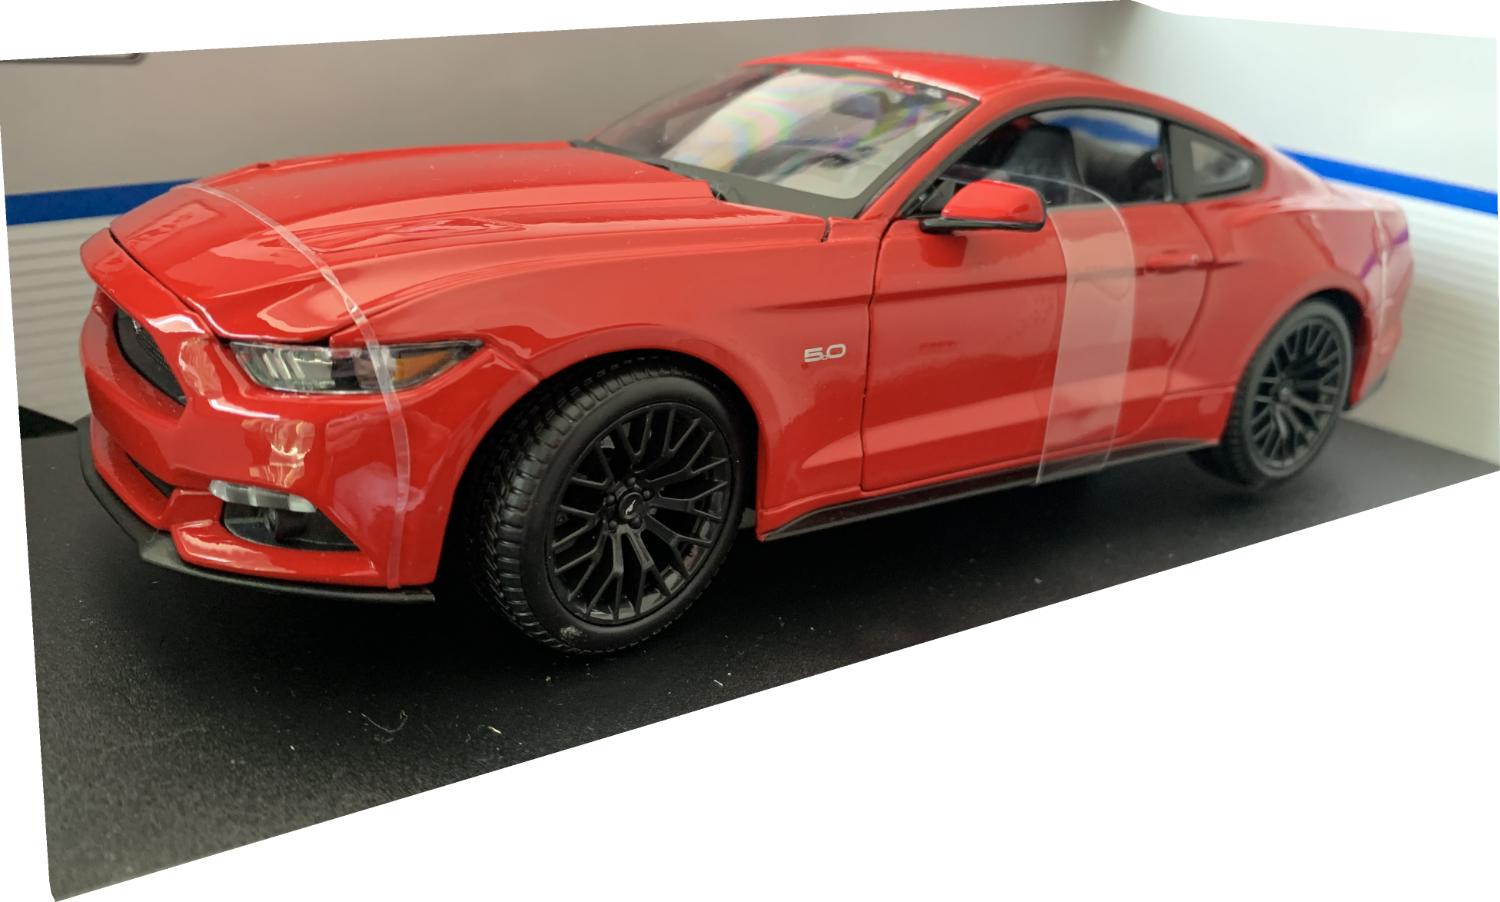 Ford Mustang 2015 in red 1:18 scale model from Maisto